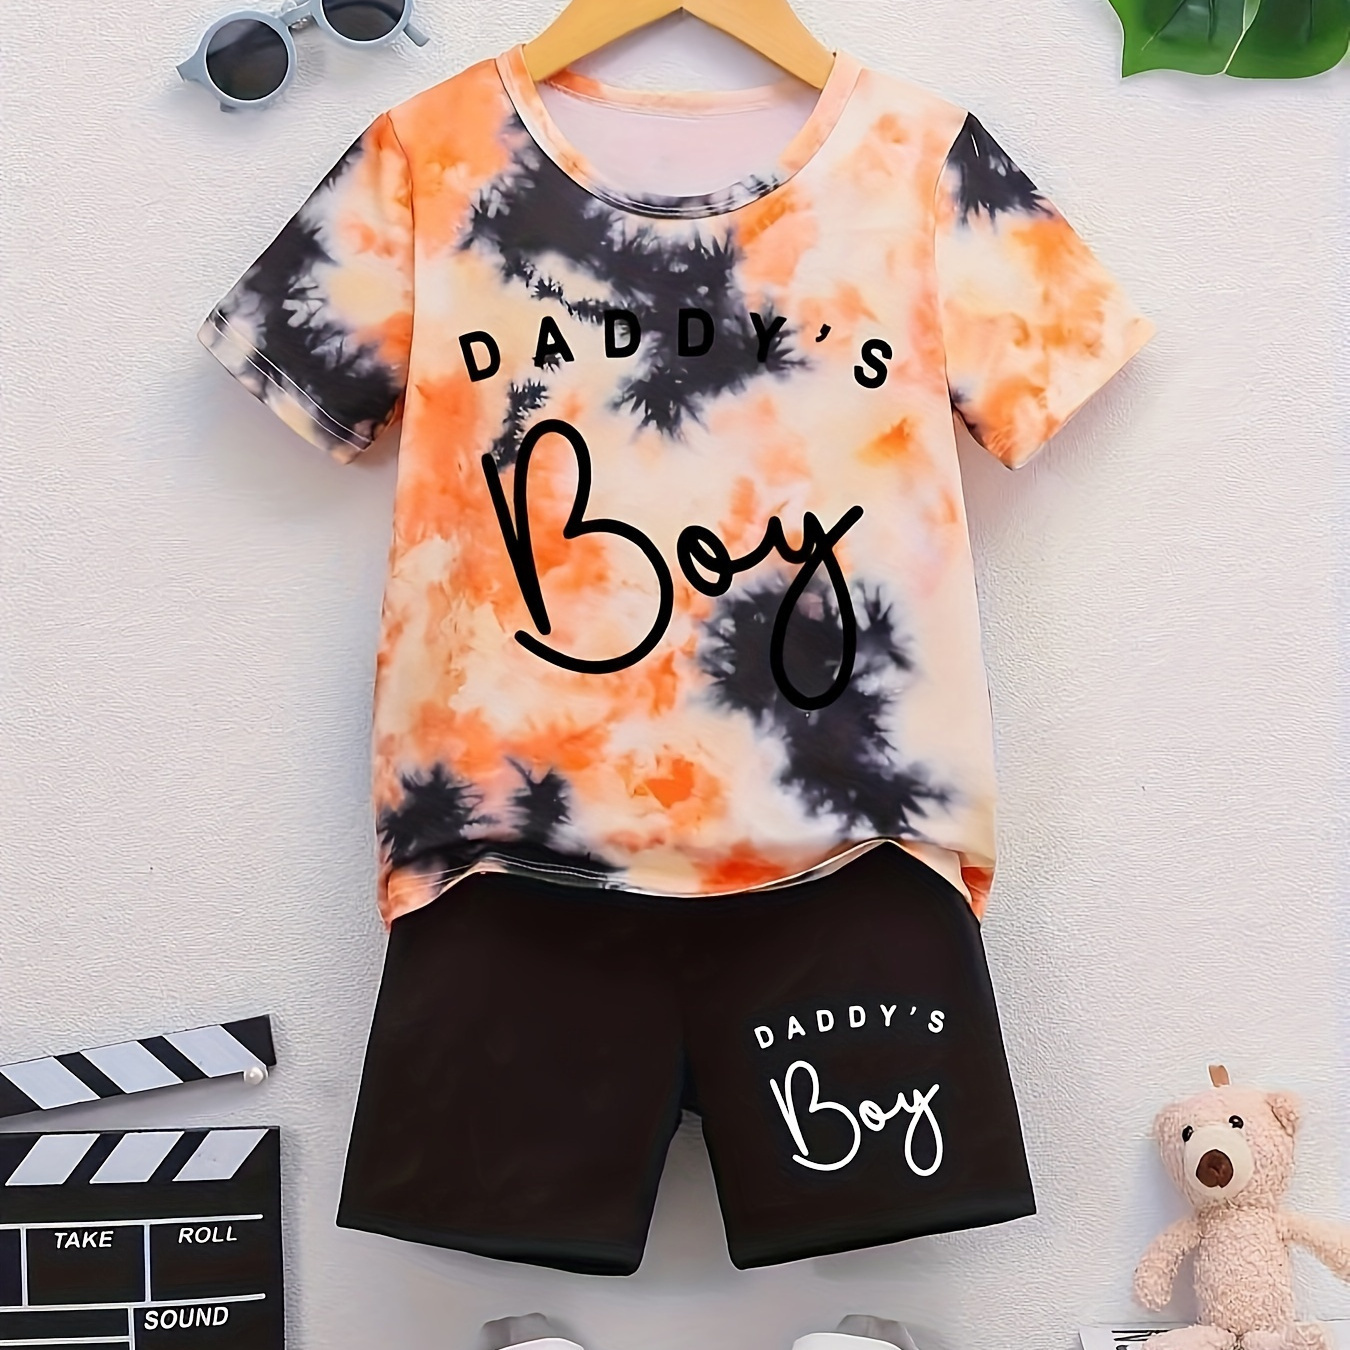 

Baby's Tie-dye Pattern 2pcs Summer Casual Outfit, "daddy's Boy" Print T-shirt & Shorts Set, Toddler & Infant Boy's Clothes